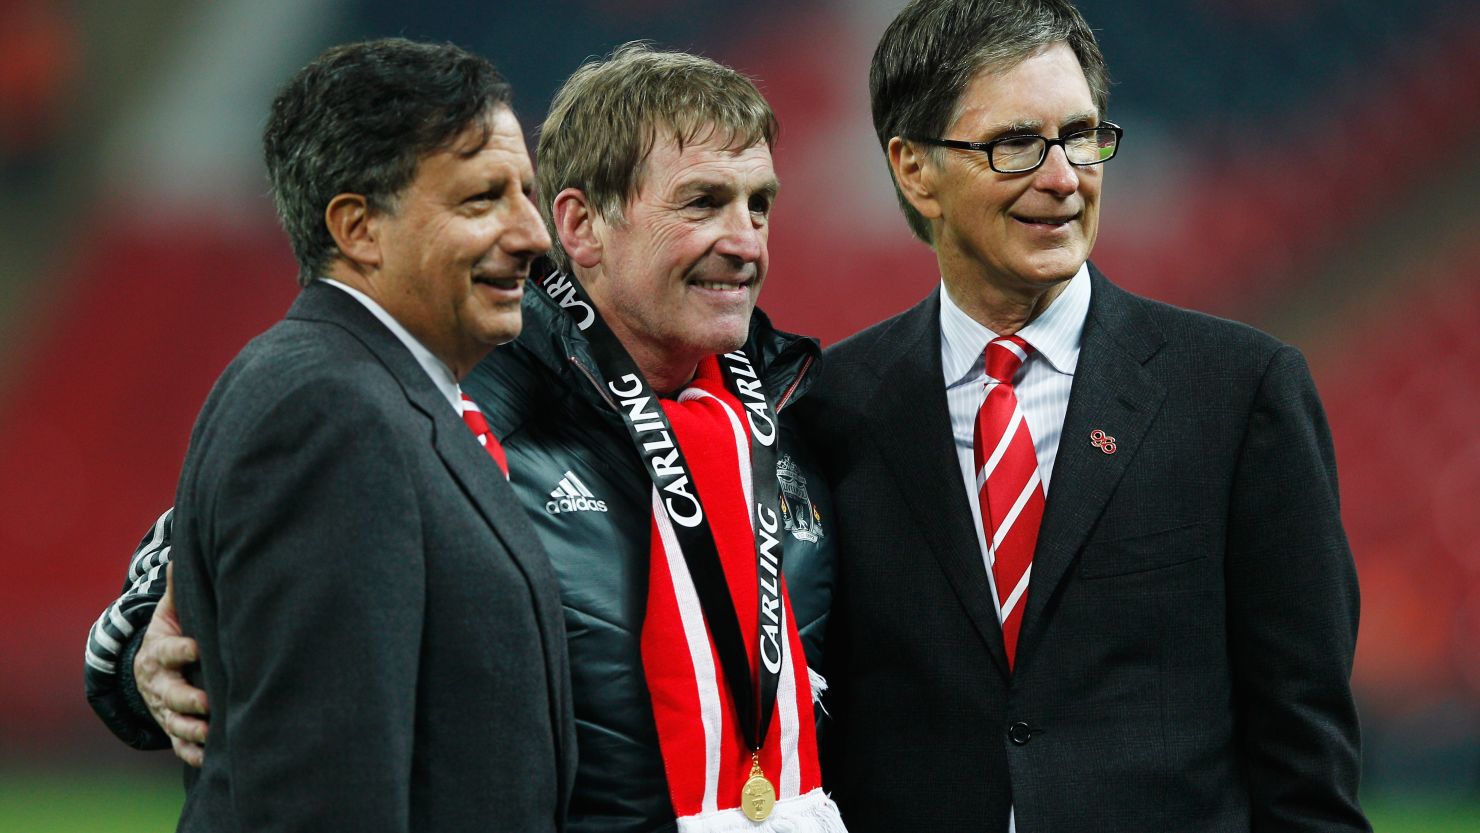 Liverpool manager Kenny Dalglish manager has received the full backing of owners Tom Werner and John W Henry 